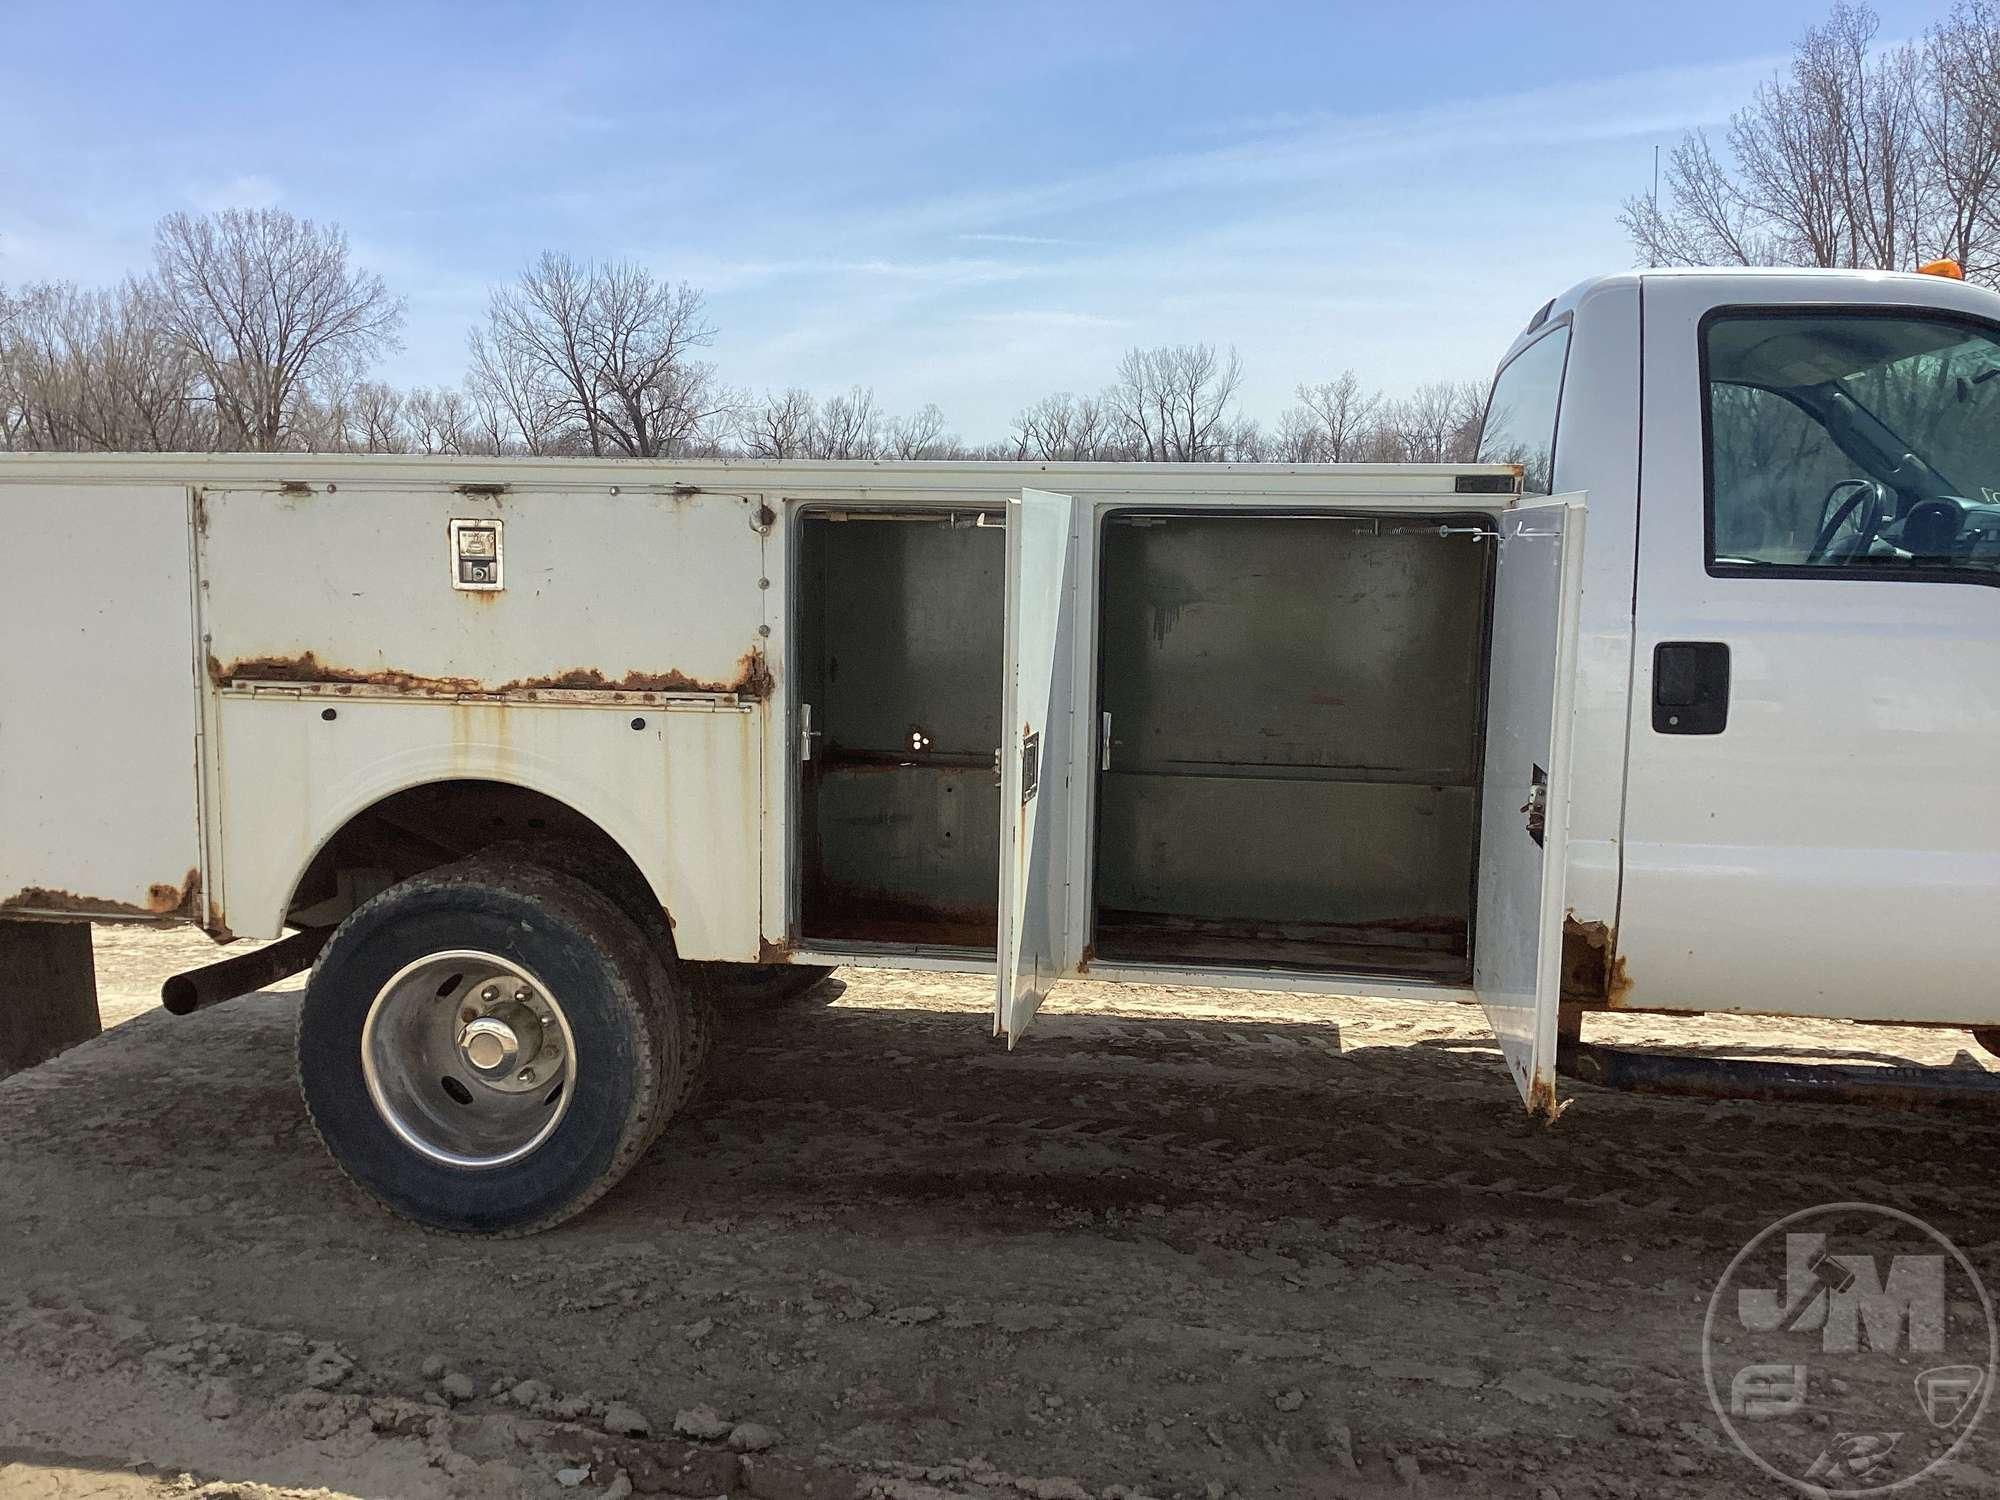 2007 FORD F-350 S/A UTILITY TRUCK VIN: 1FDWF37P77EA02558